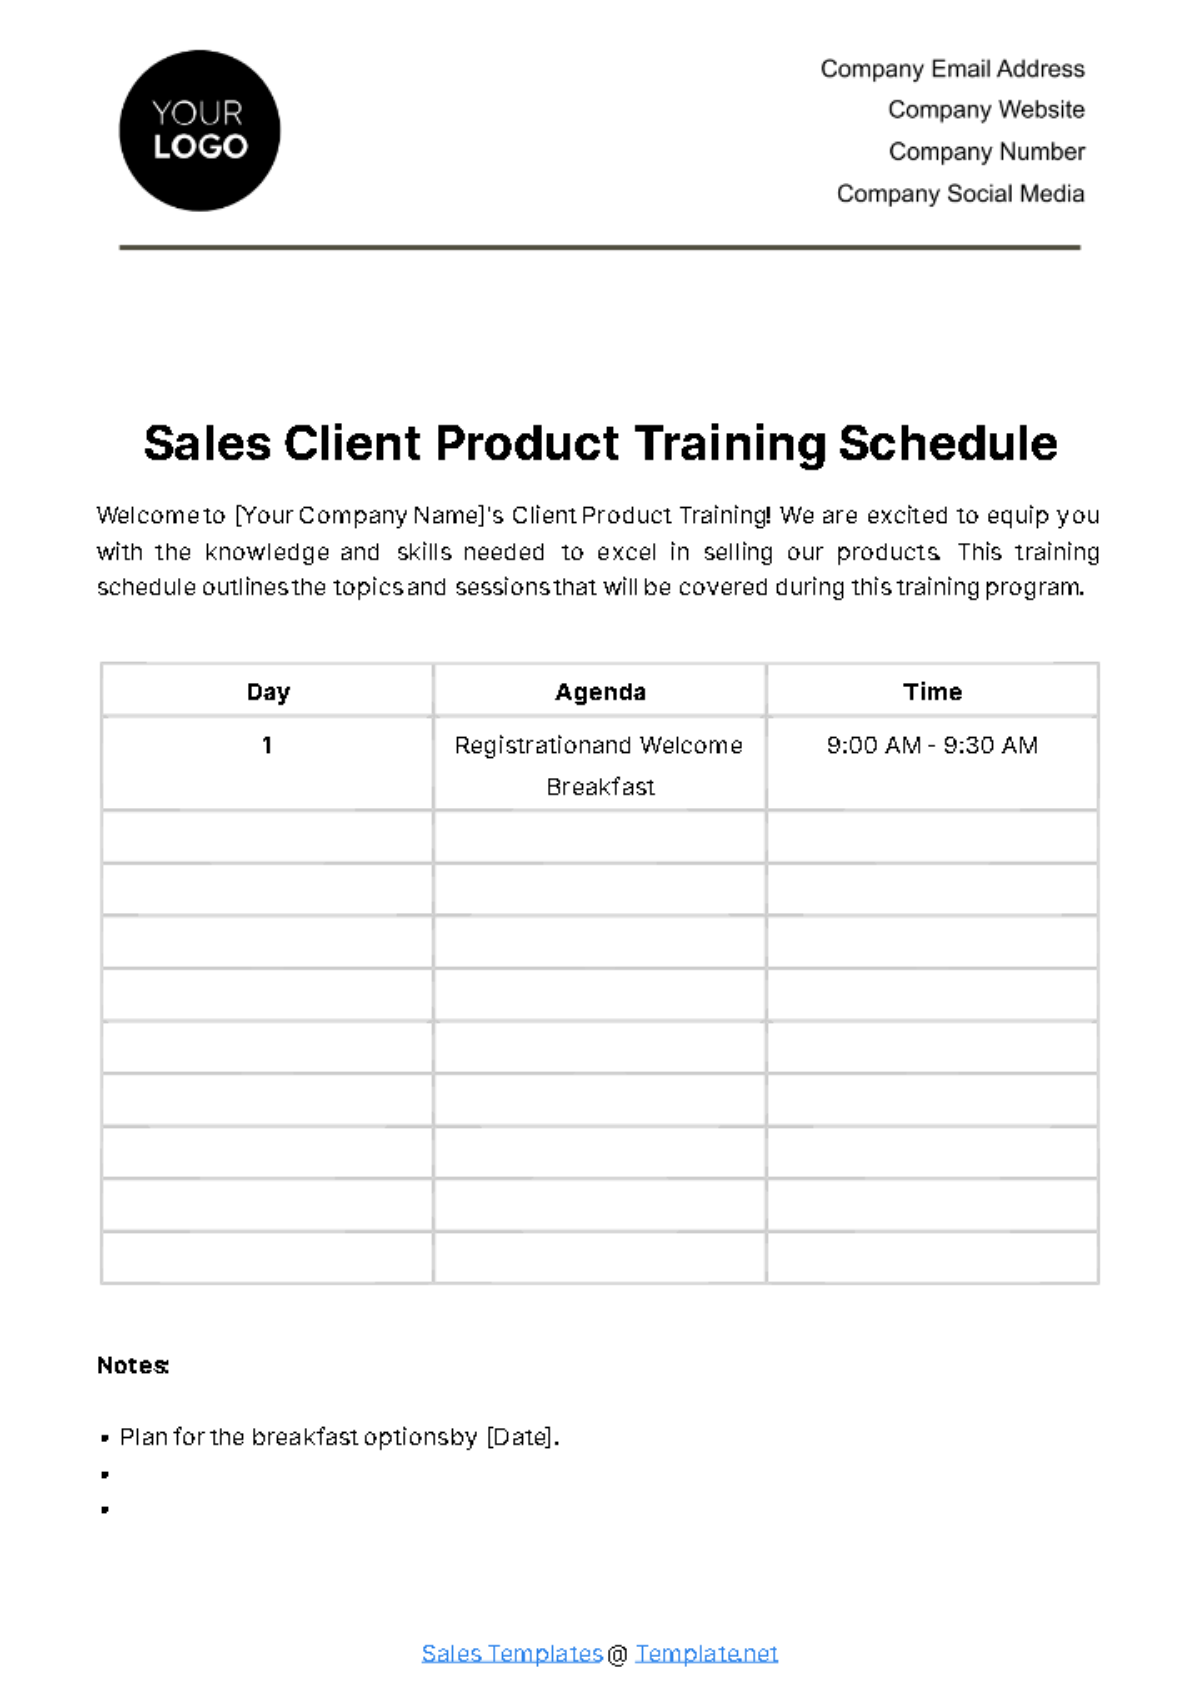 Sales Client Product Training Schedule Template